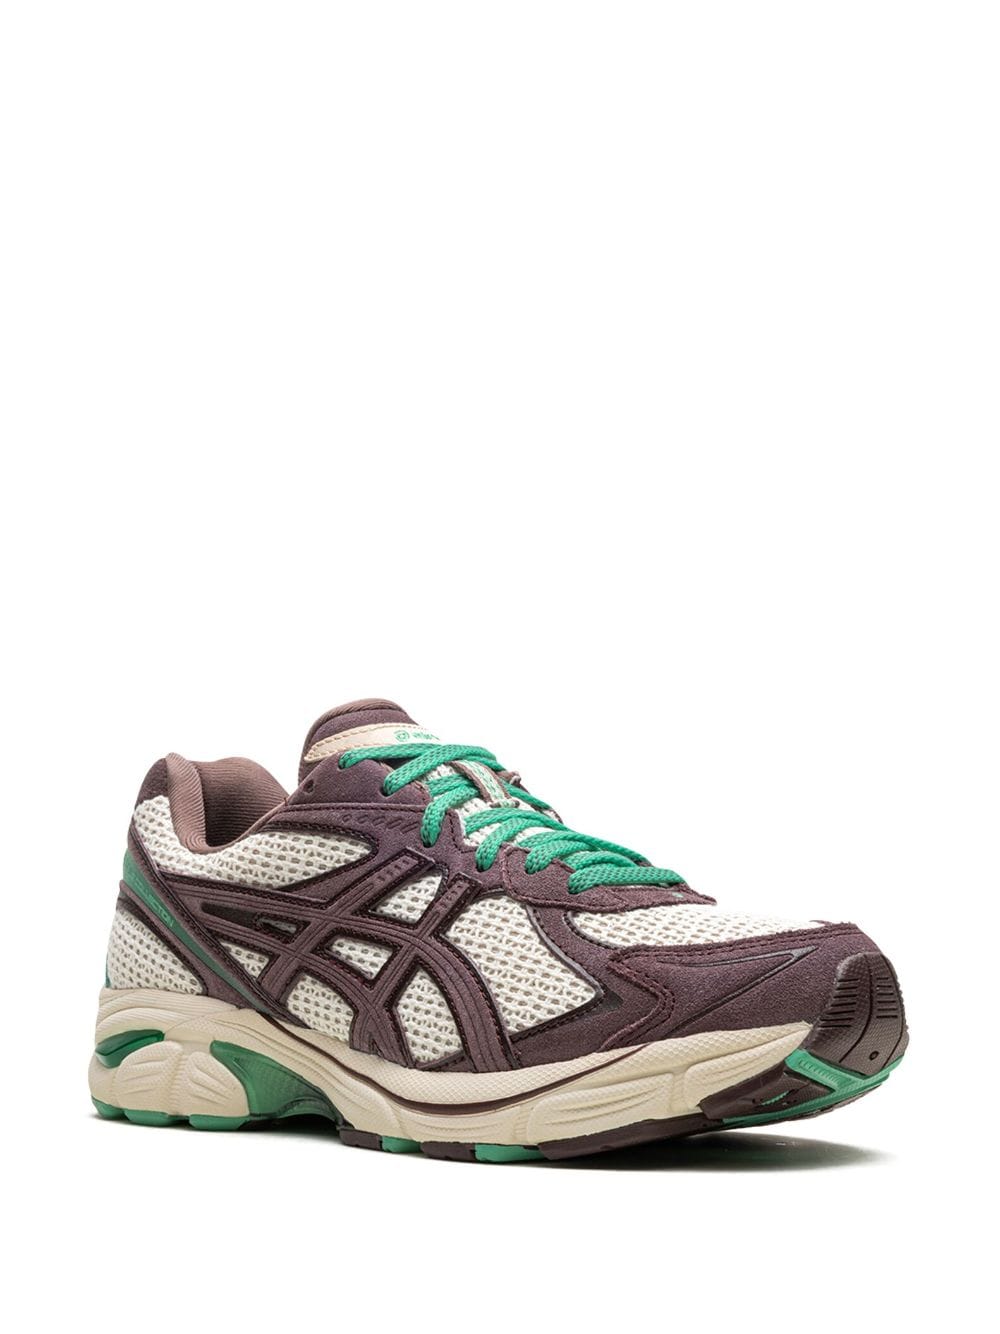 Image 2 of ASICS x Earls Collection GT-2160 sneakers